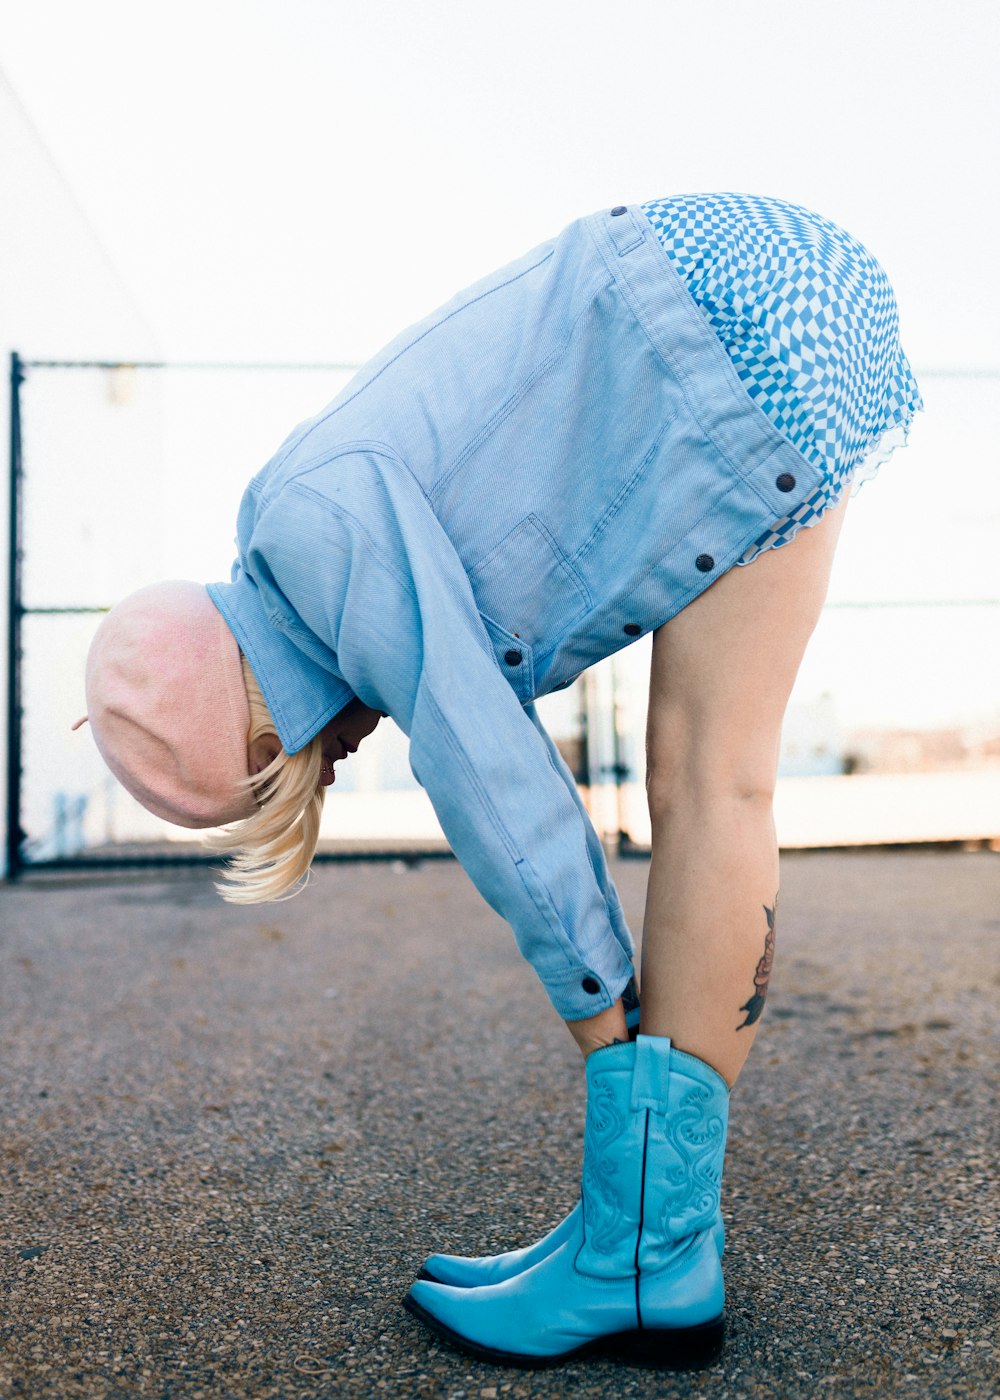 a person with a hat and blue boots doing a handstand